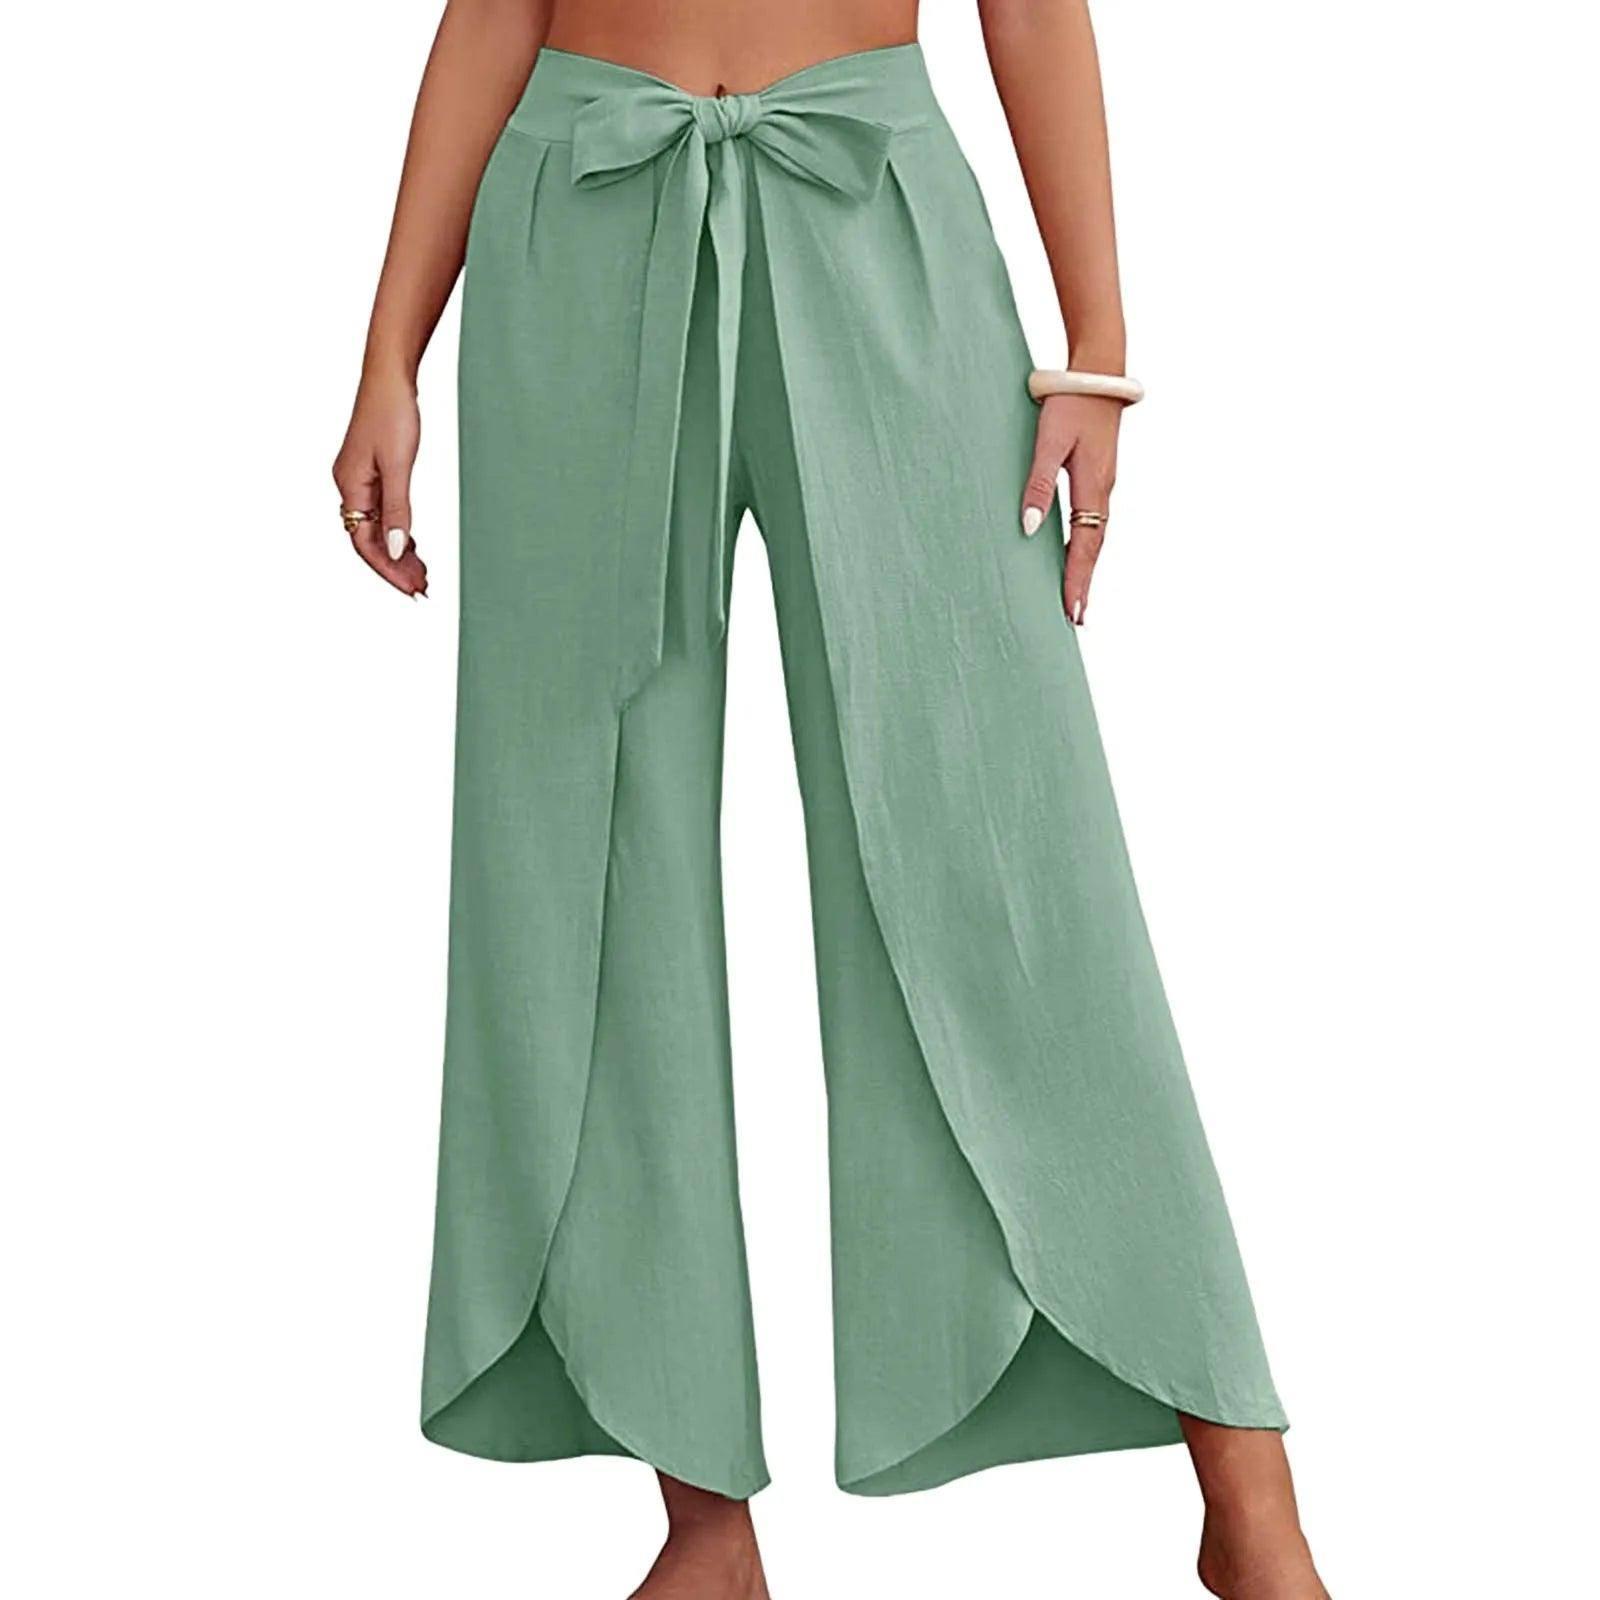 Women's Fashion Loose Casual Solid Color High Waist Flowy-Green-10